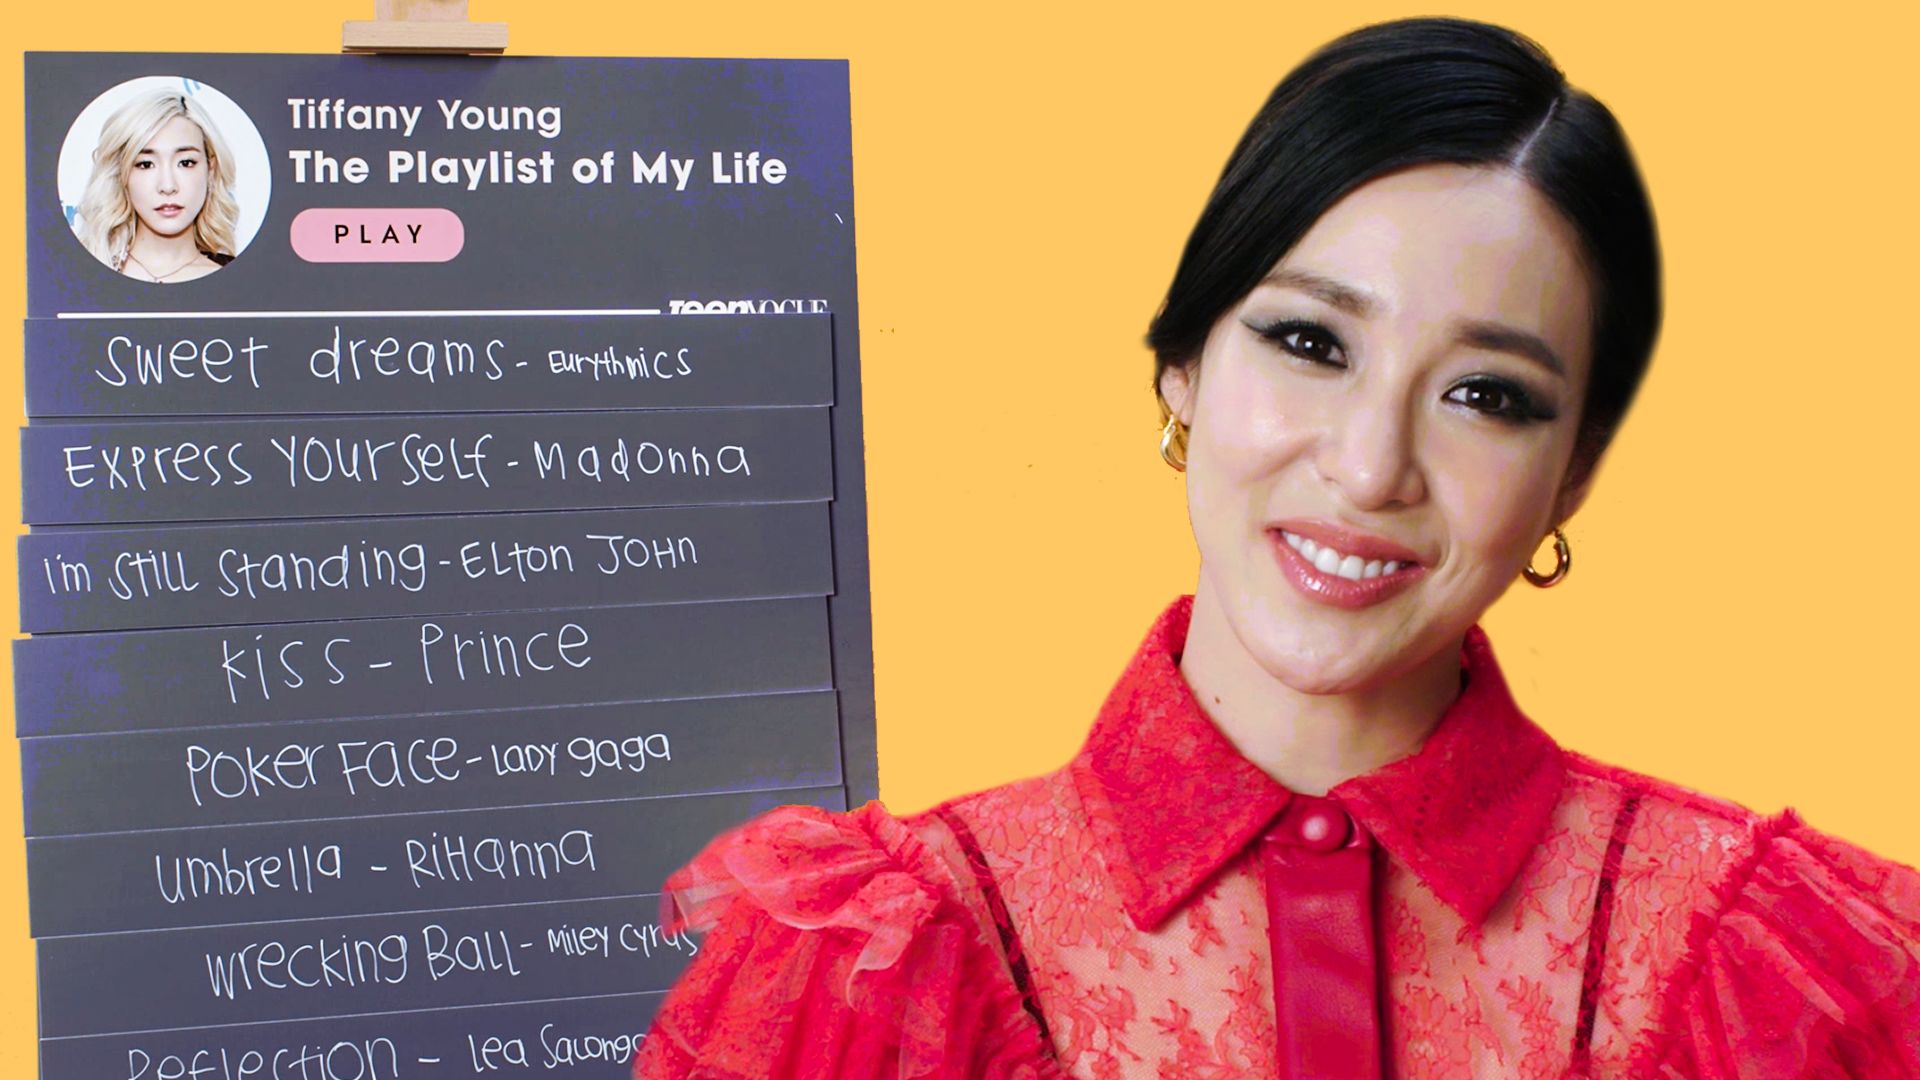 Watch Tiffany Young Creates the Playlist of Her Life